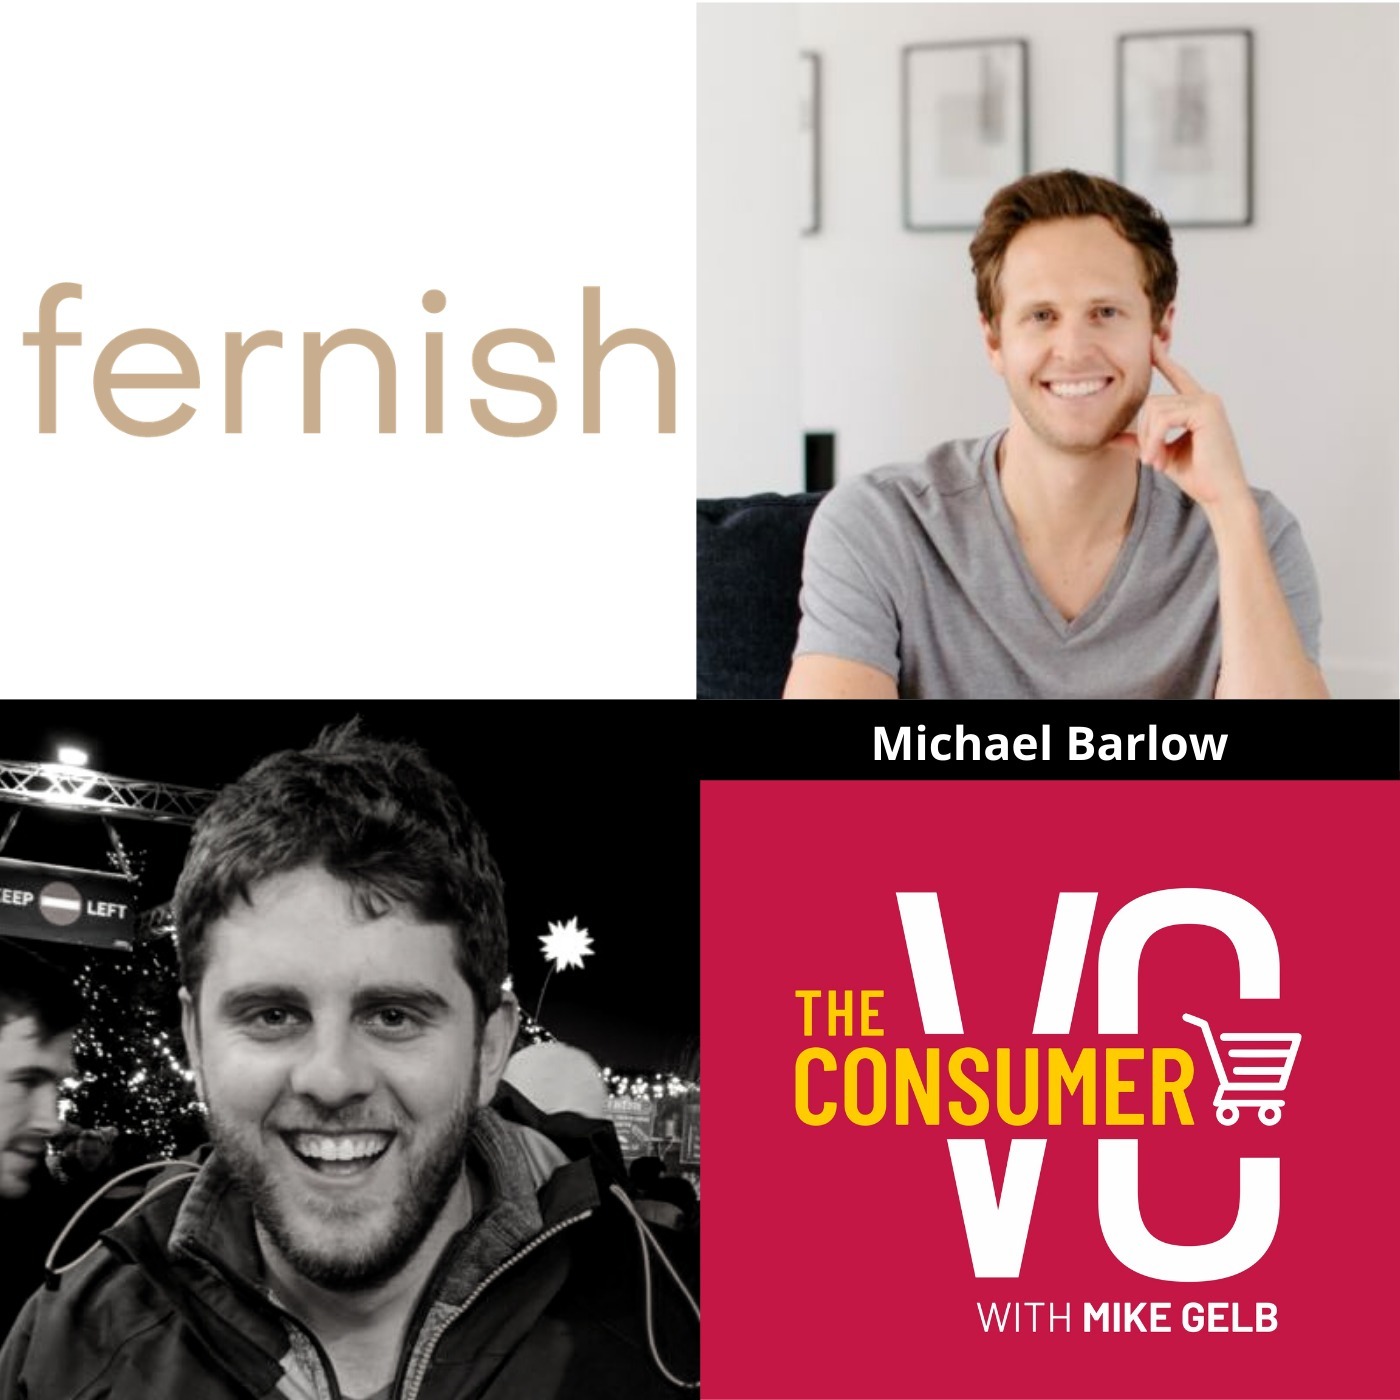 Michael Barlow (Fernish) - The Advantage of Not Knowing, His Approach to Building a Rental Furniture Supply Chain, and The Biggest Hurdle When Fundraising